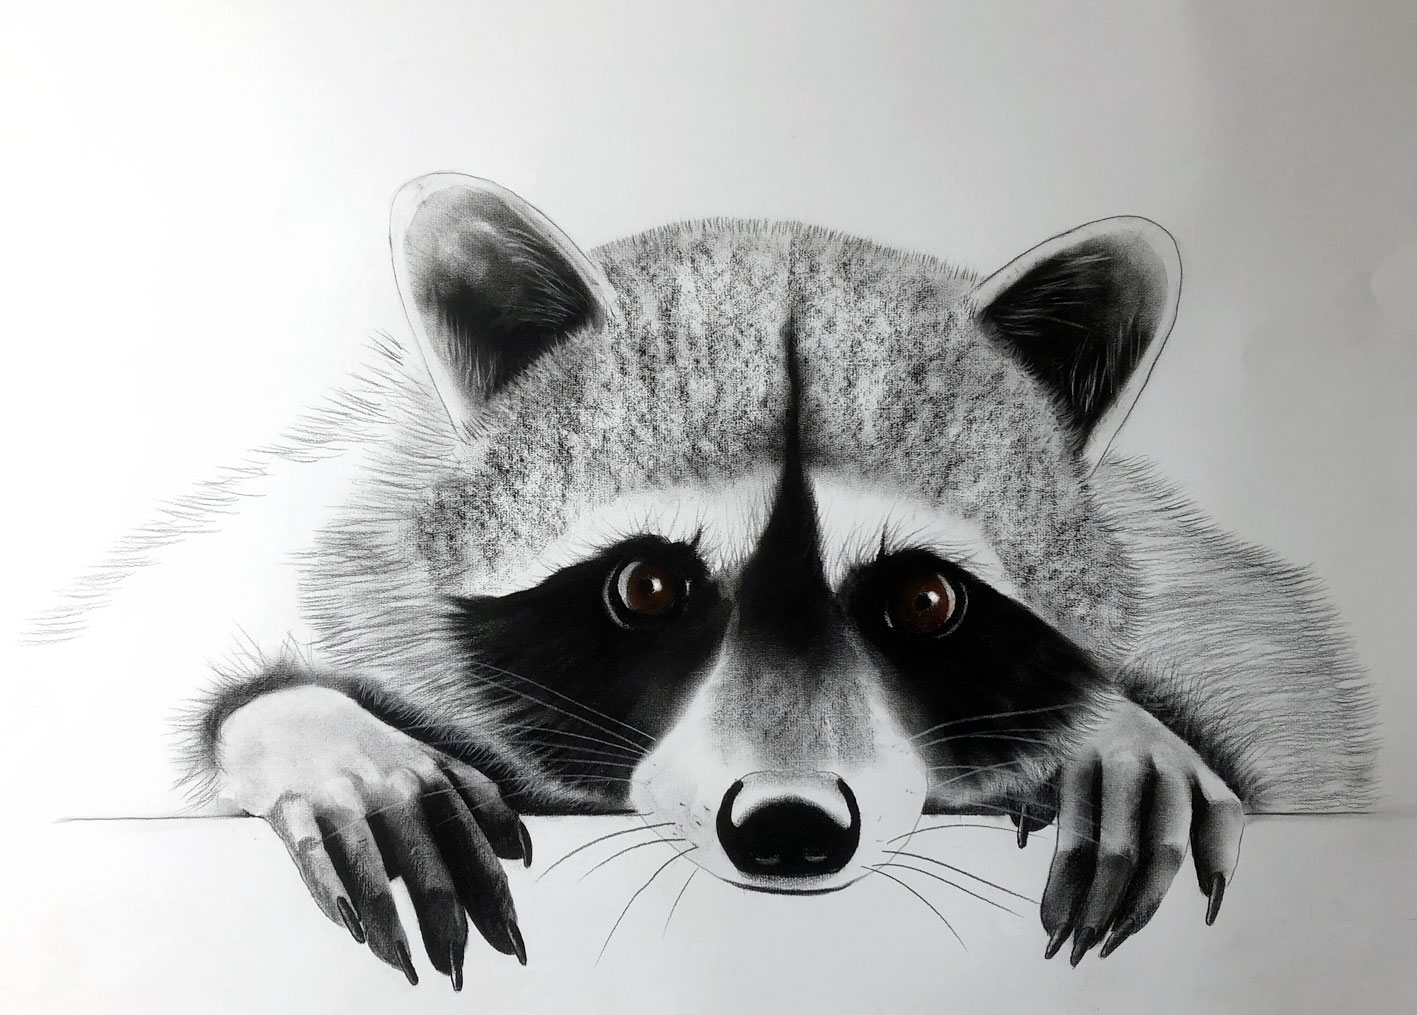 POOR-LITTLE-RACOON racoon-procyon-lotor Thierry Bisch Contemporary painter animals painting art  nature biodiversity conservation 